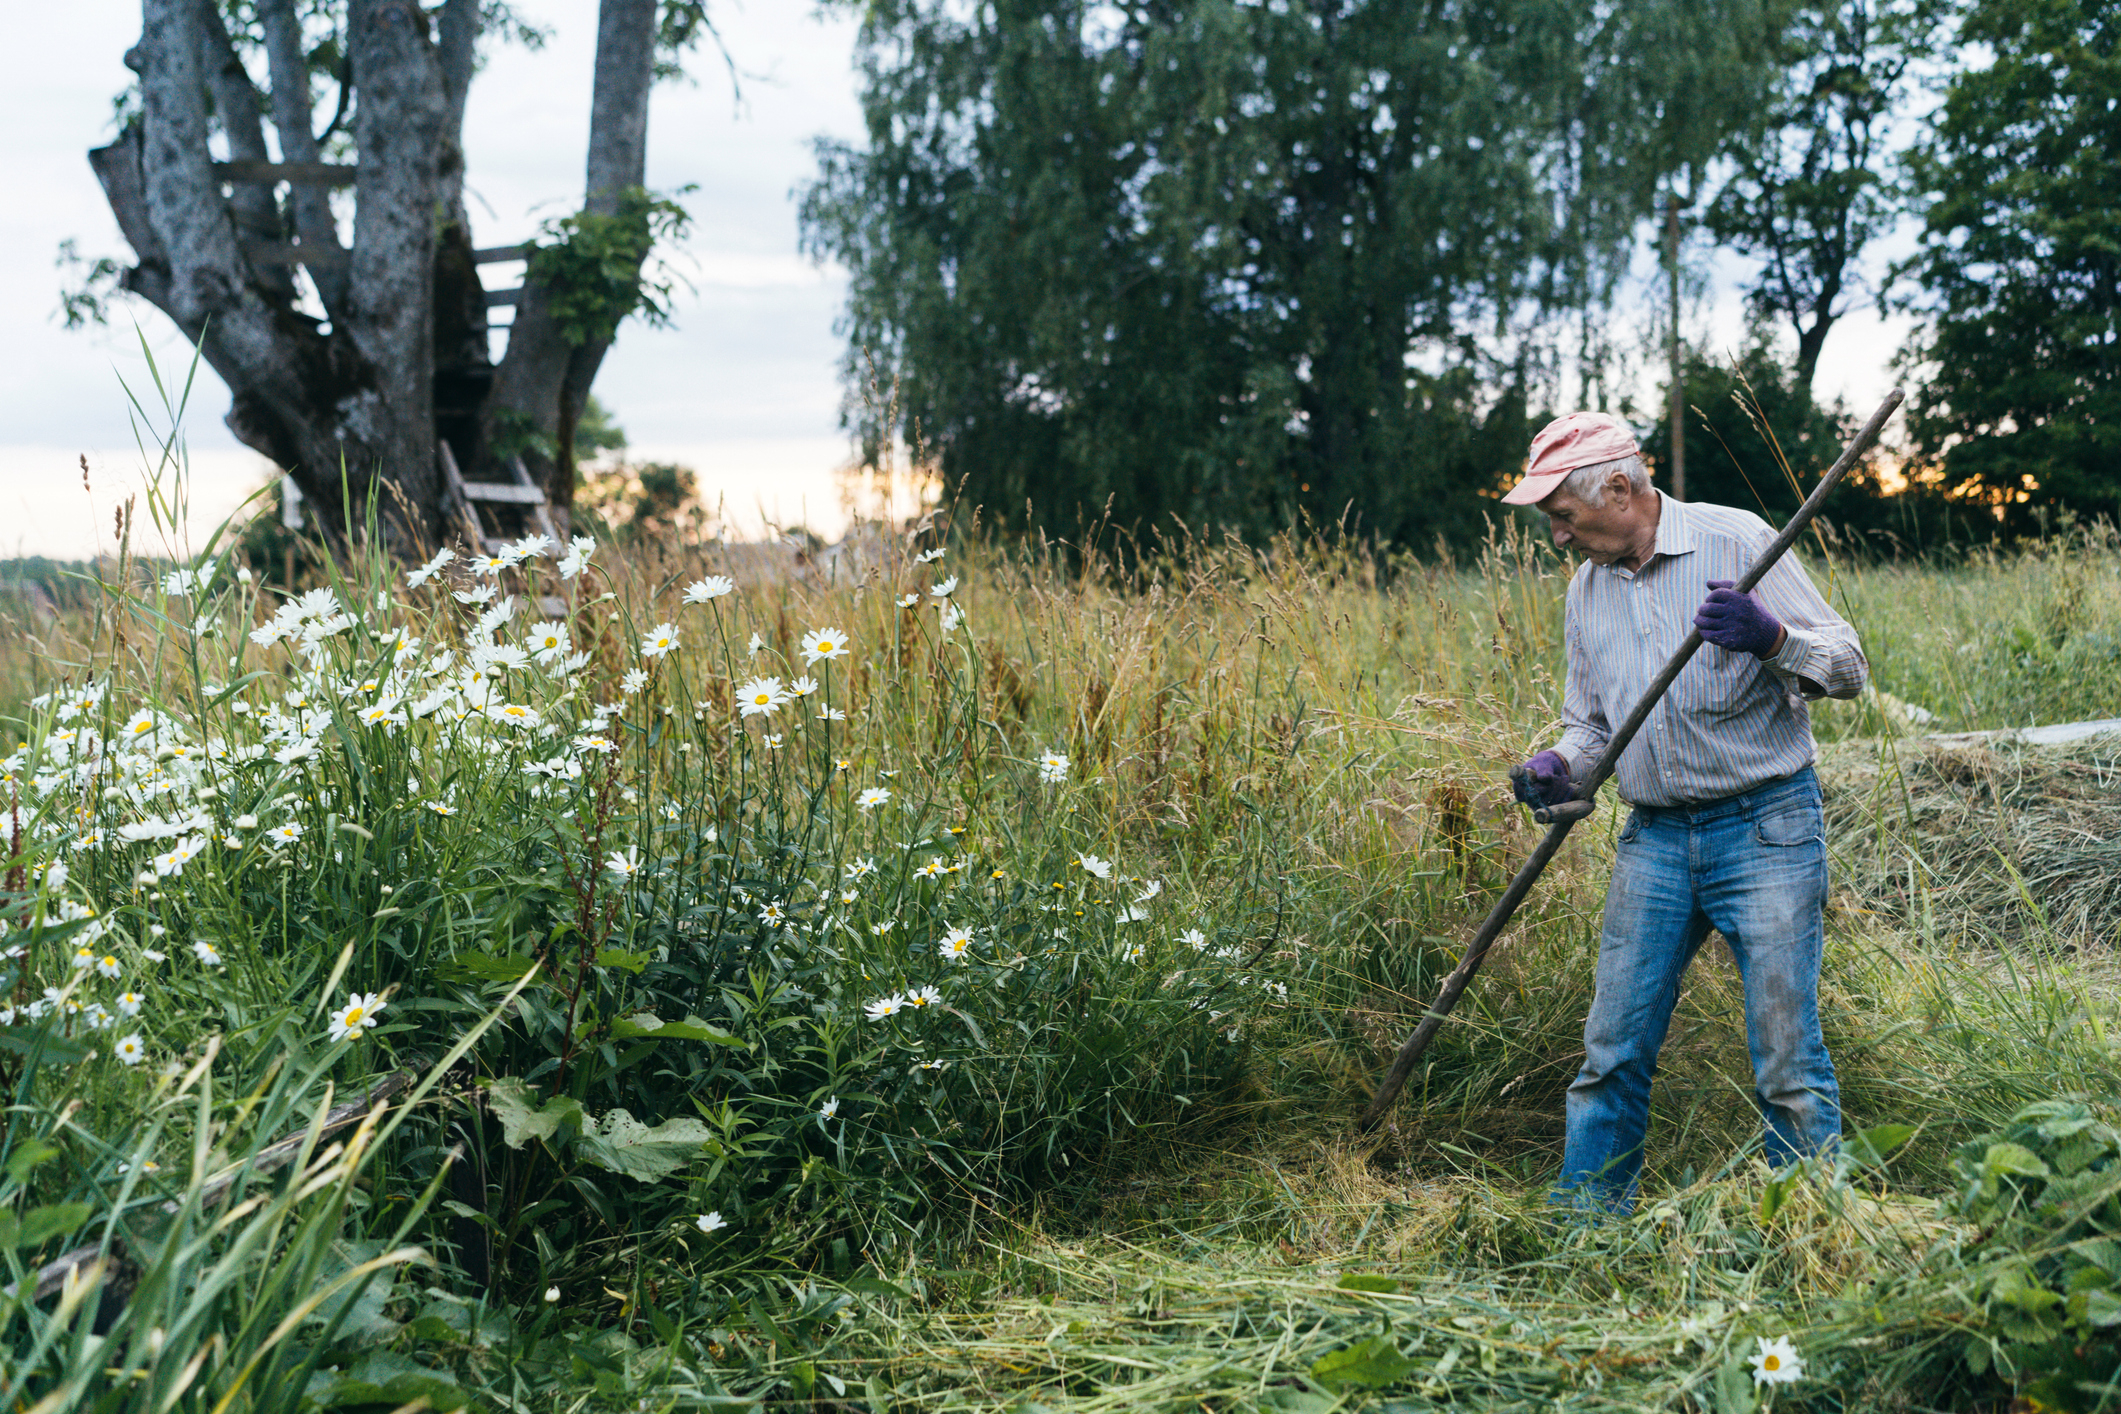 An elderly person wearing a cap, a long-sleeve shirt, gloves, and jeans is raking hay in a lush, overgrown garden with tall grass and wildflowers